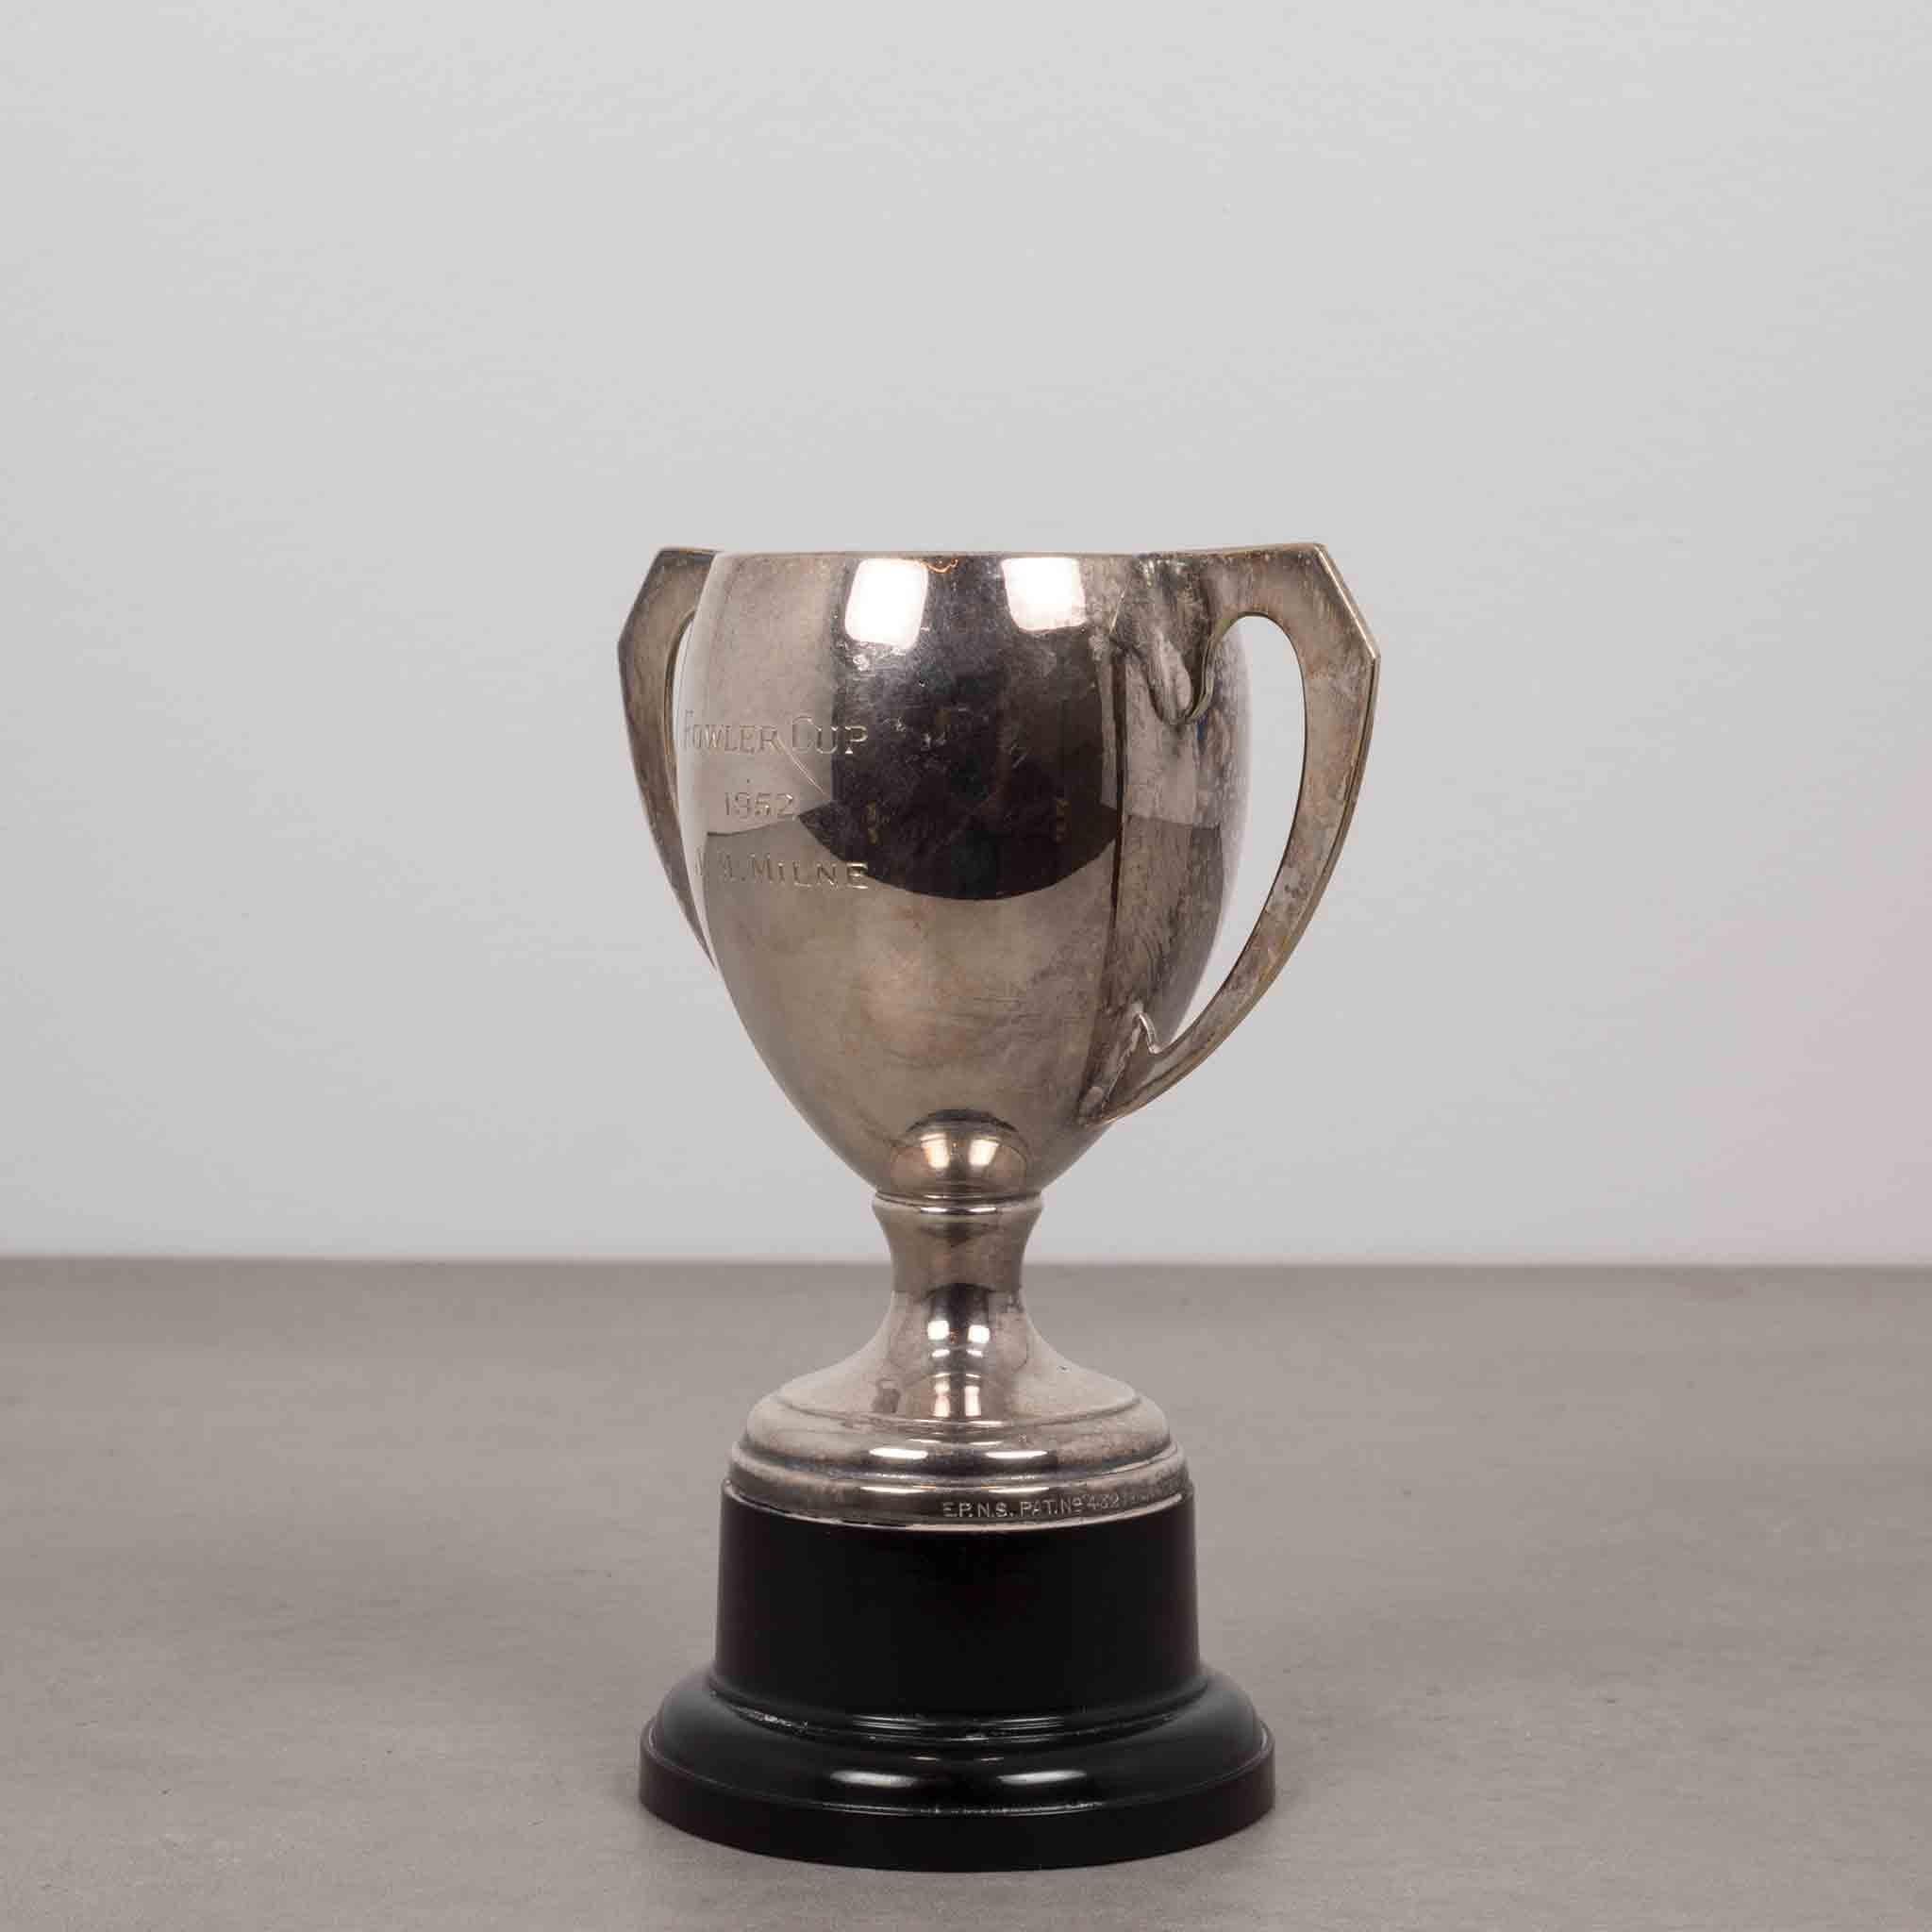 About
This is an original loving cup trophy. The body is silver plated with a black base and stylized handles. The trophy is inscribed 